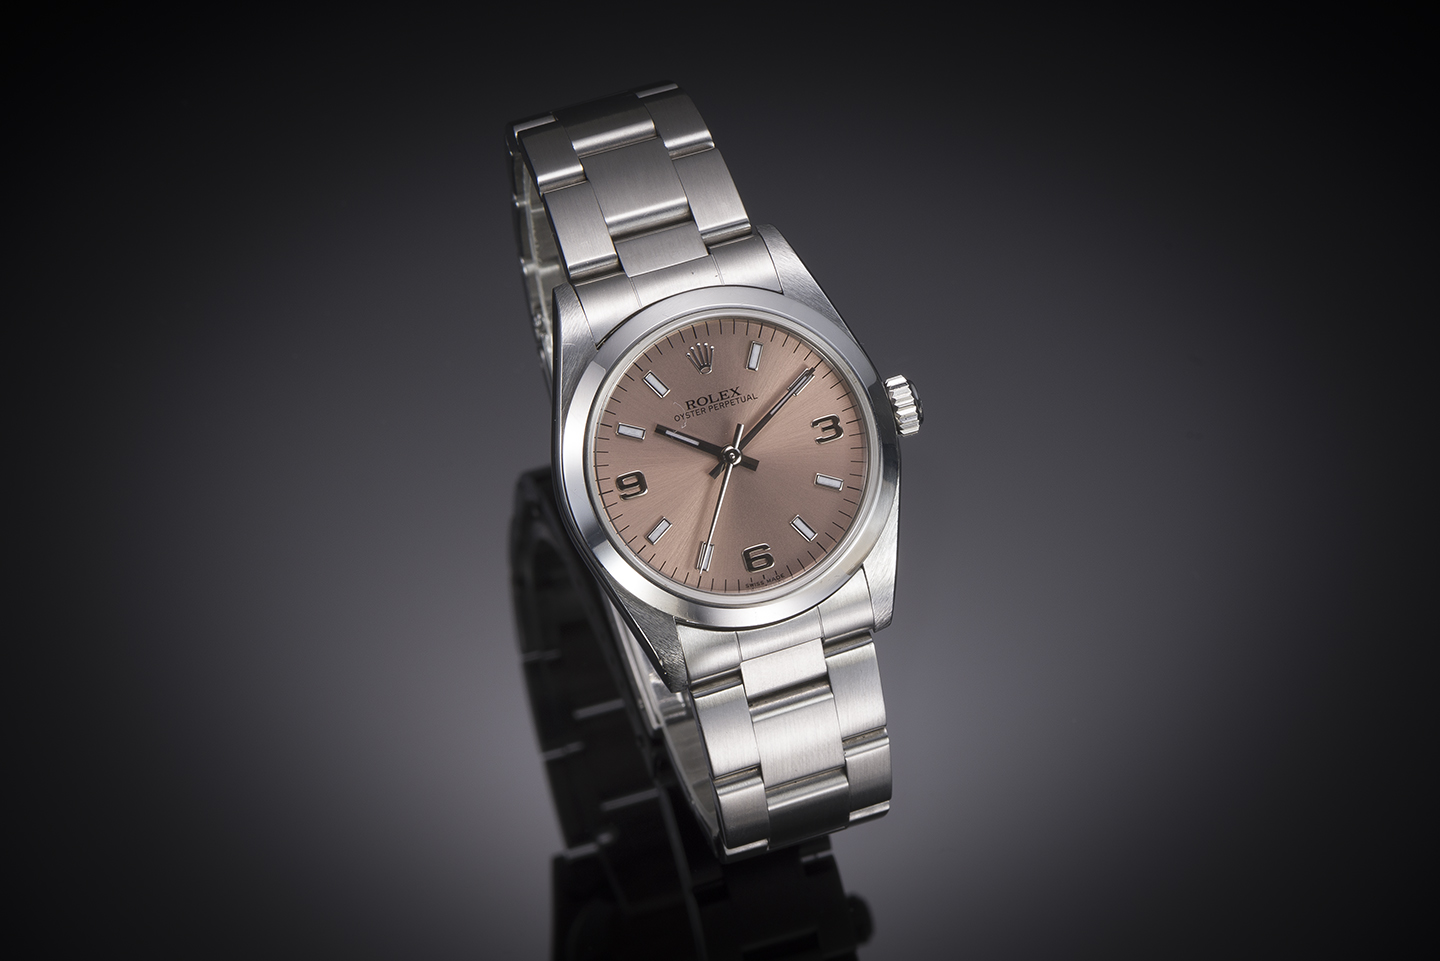 Montre Rolex Oyster Perpetual lady 31 mm